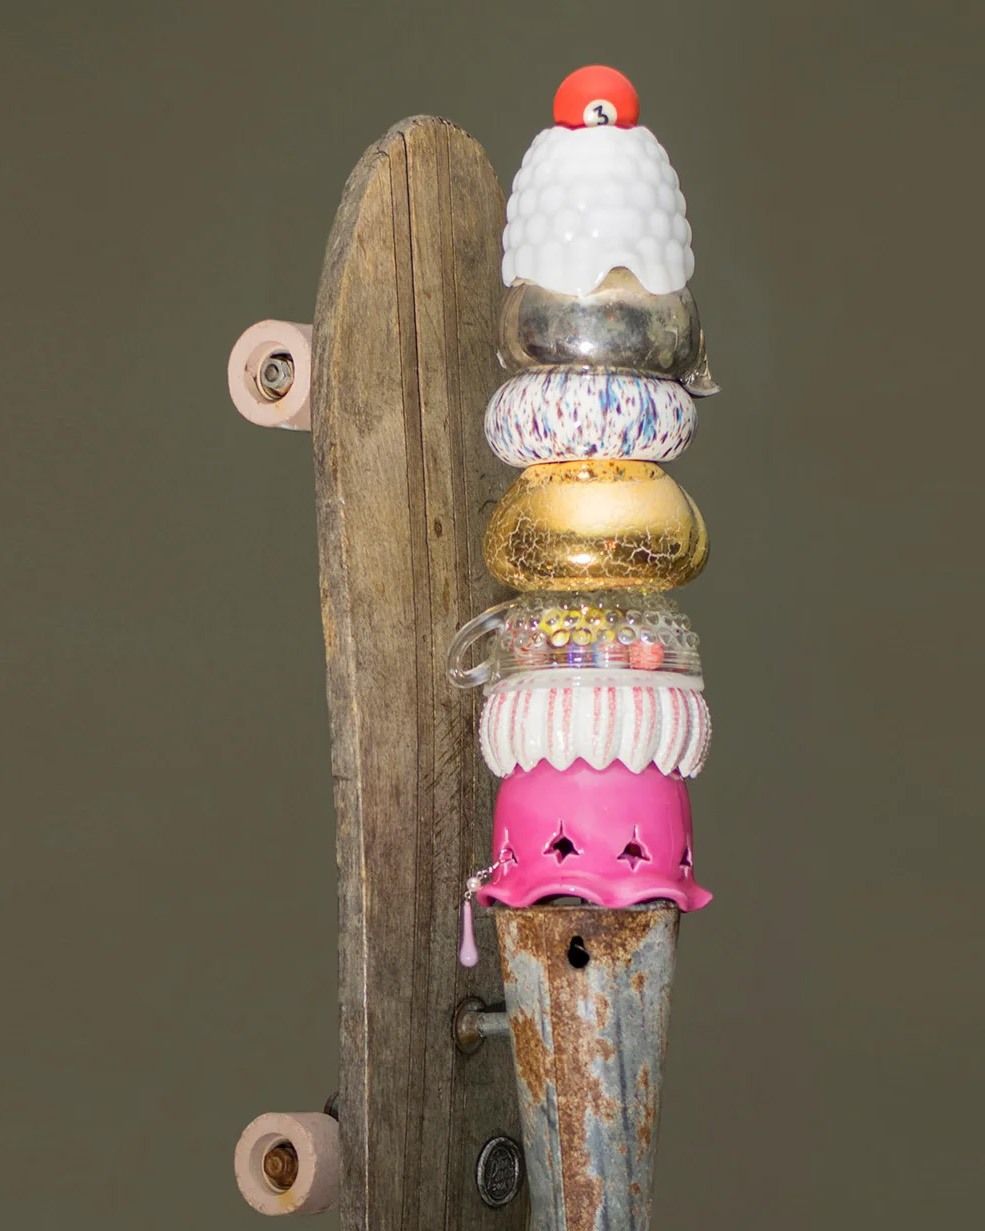 Sculptural Assemblage: Creating Art with Found Objects